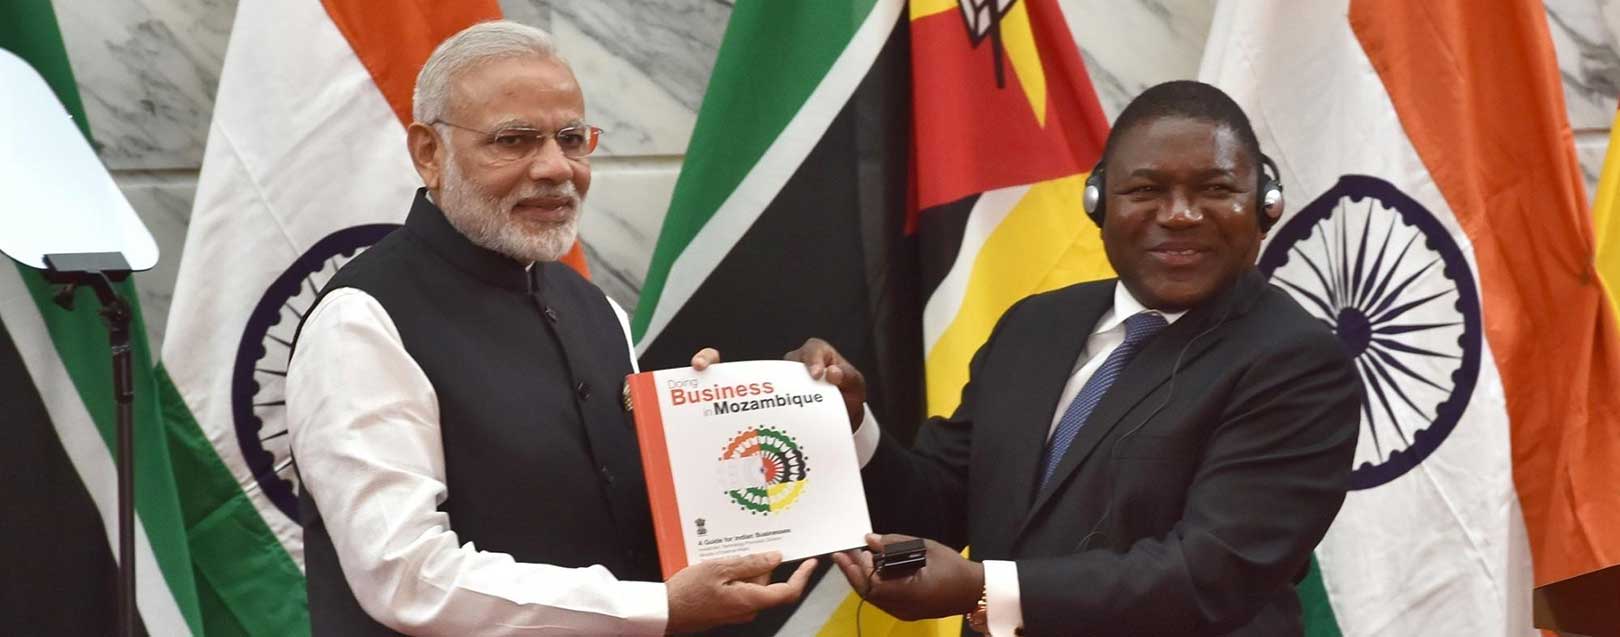 India gives 30 SUVs to Mozambique